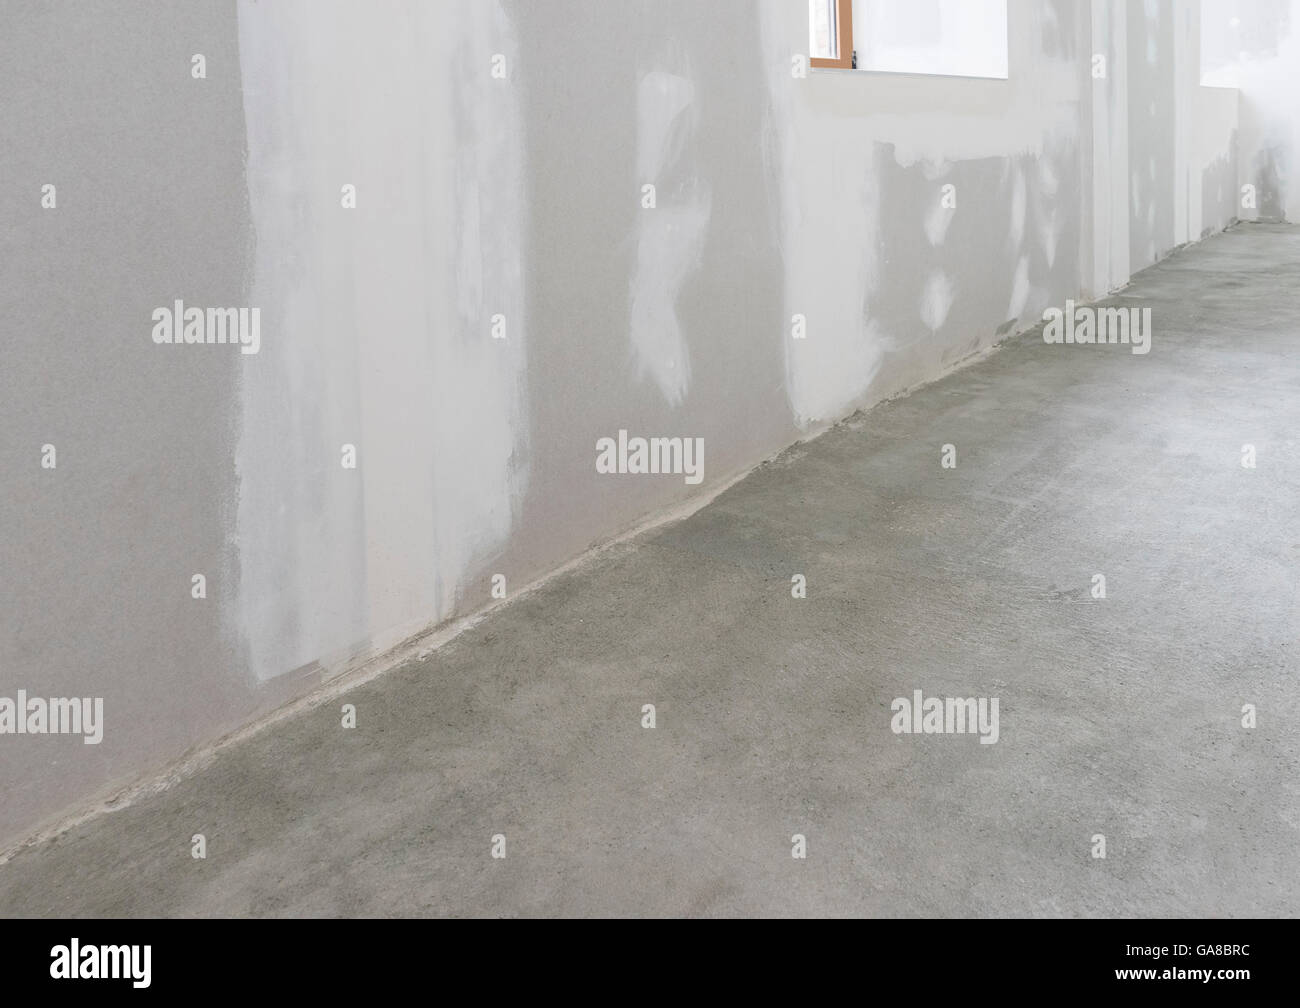 Unfinished apartment interior with concrete floor Stock Photo